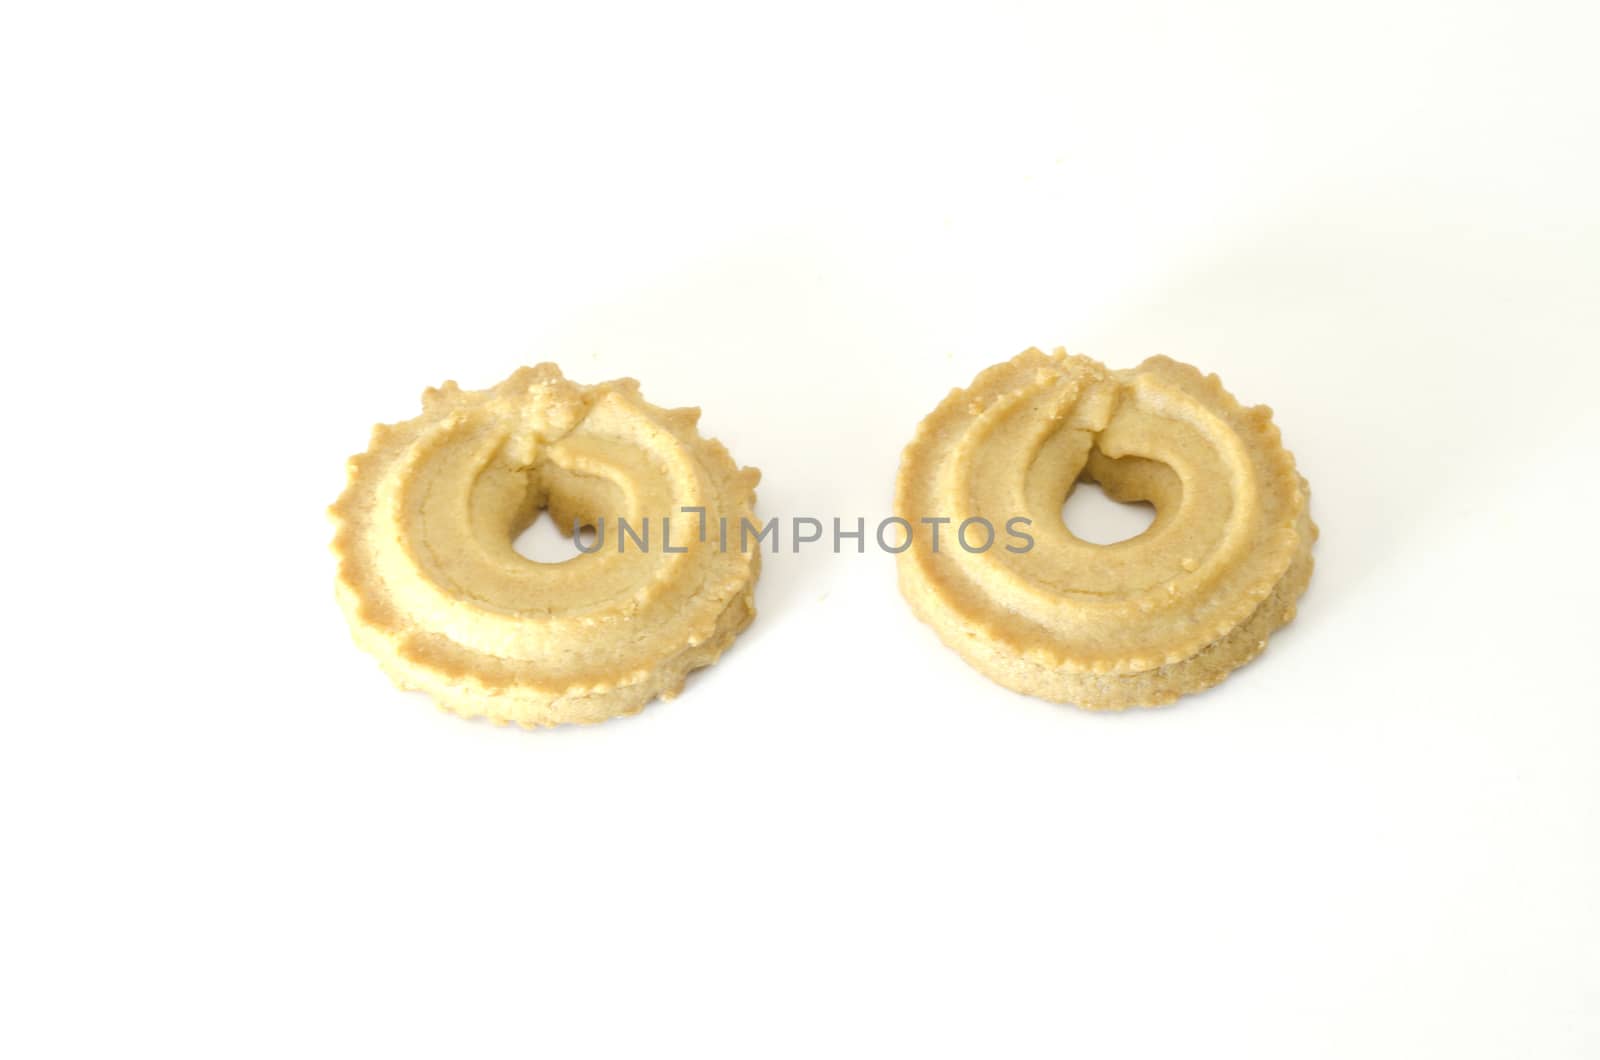 cookies isolated on white background